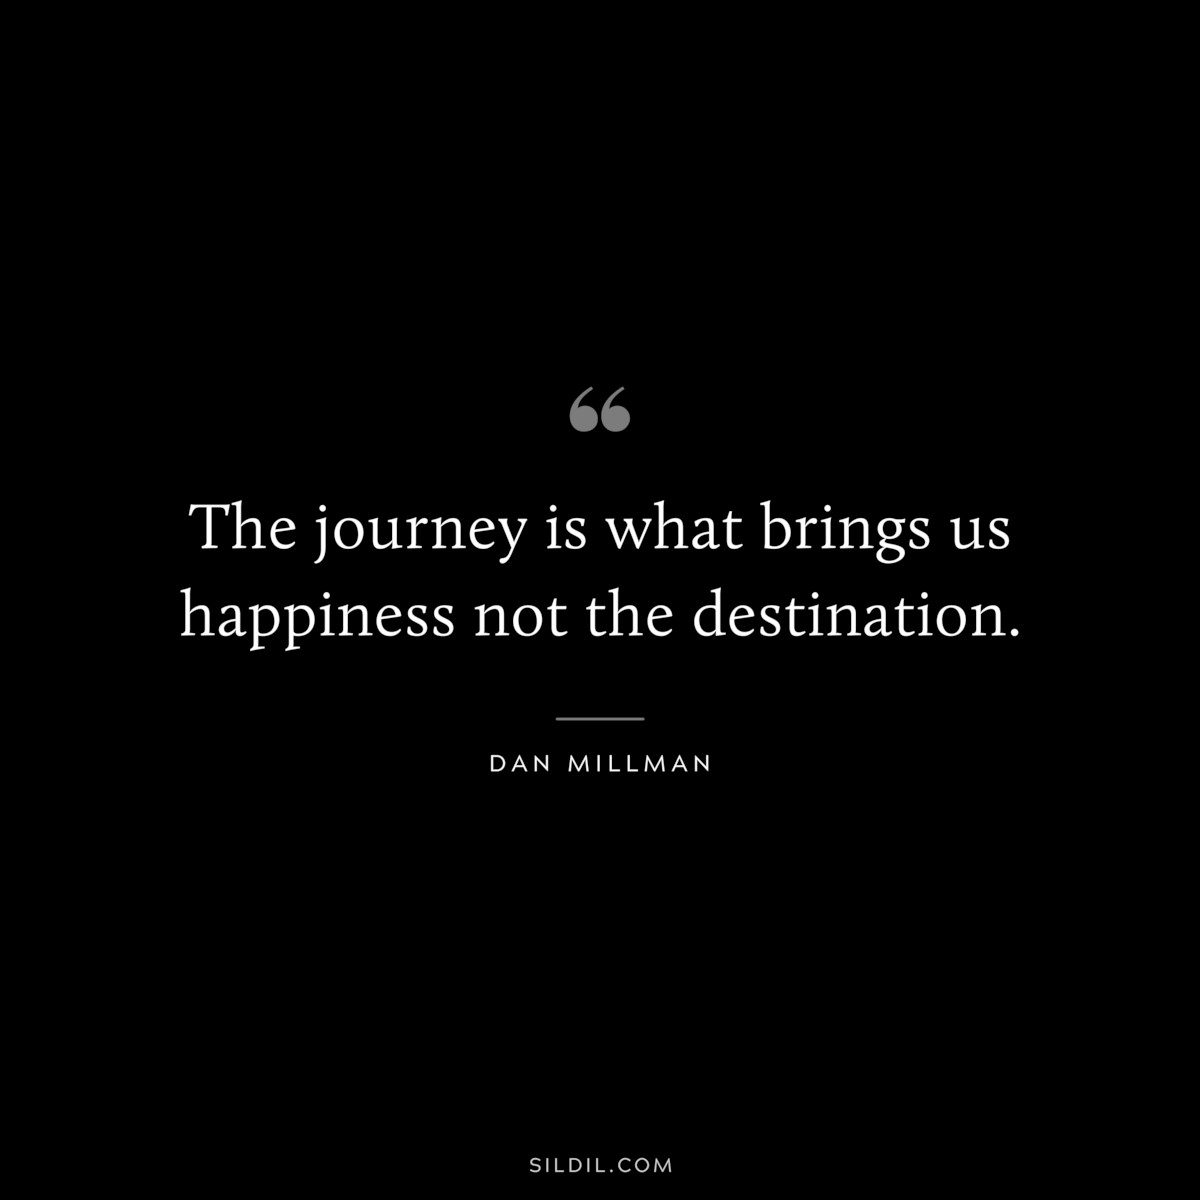 The journey is what brings us happiness not the destination. ― Dan Millman